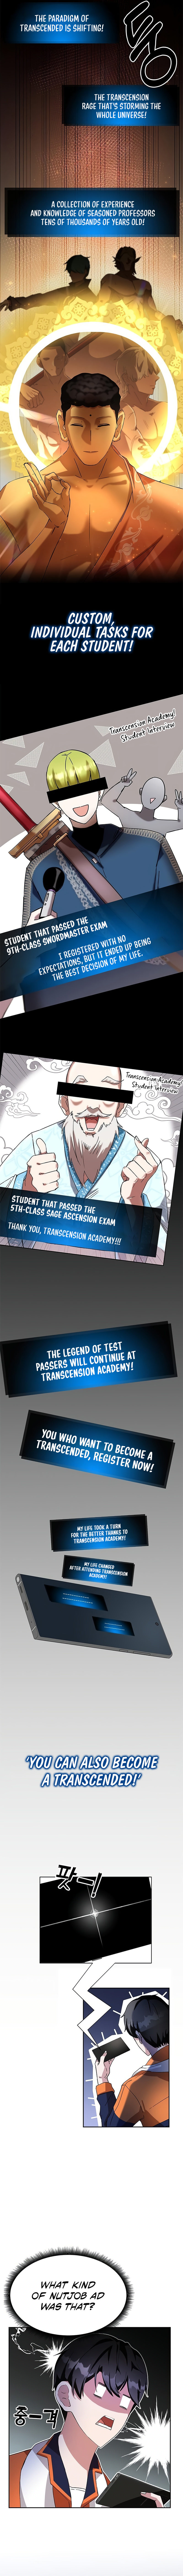 Transcension Academy - Chapter 1 Page 5